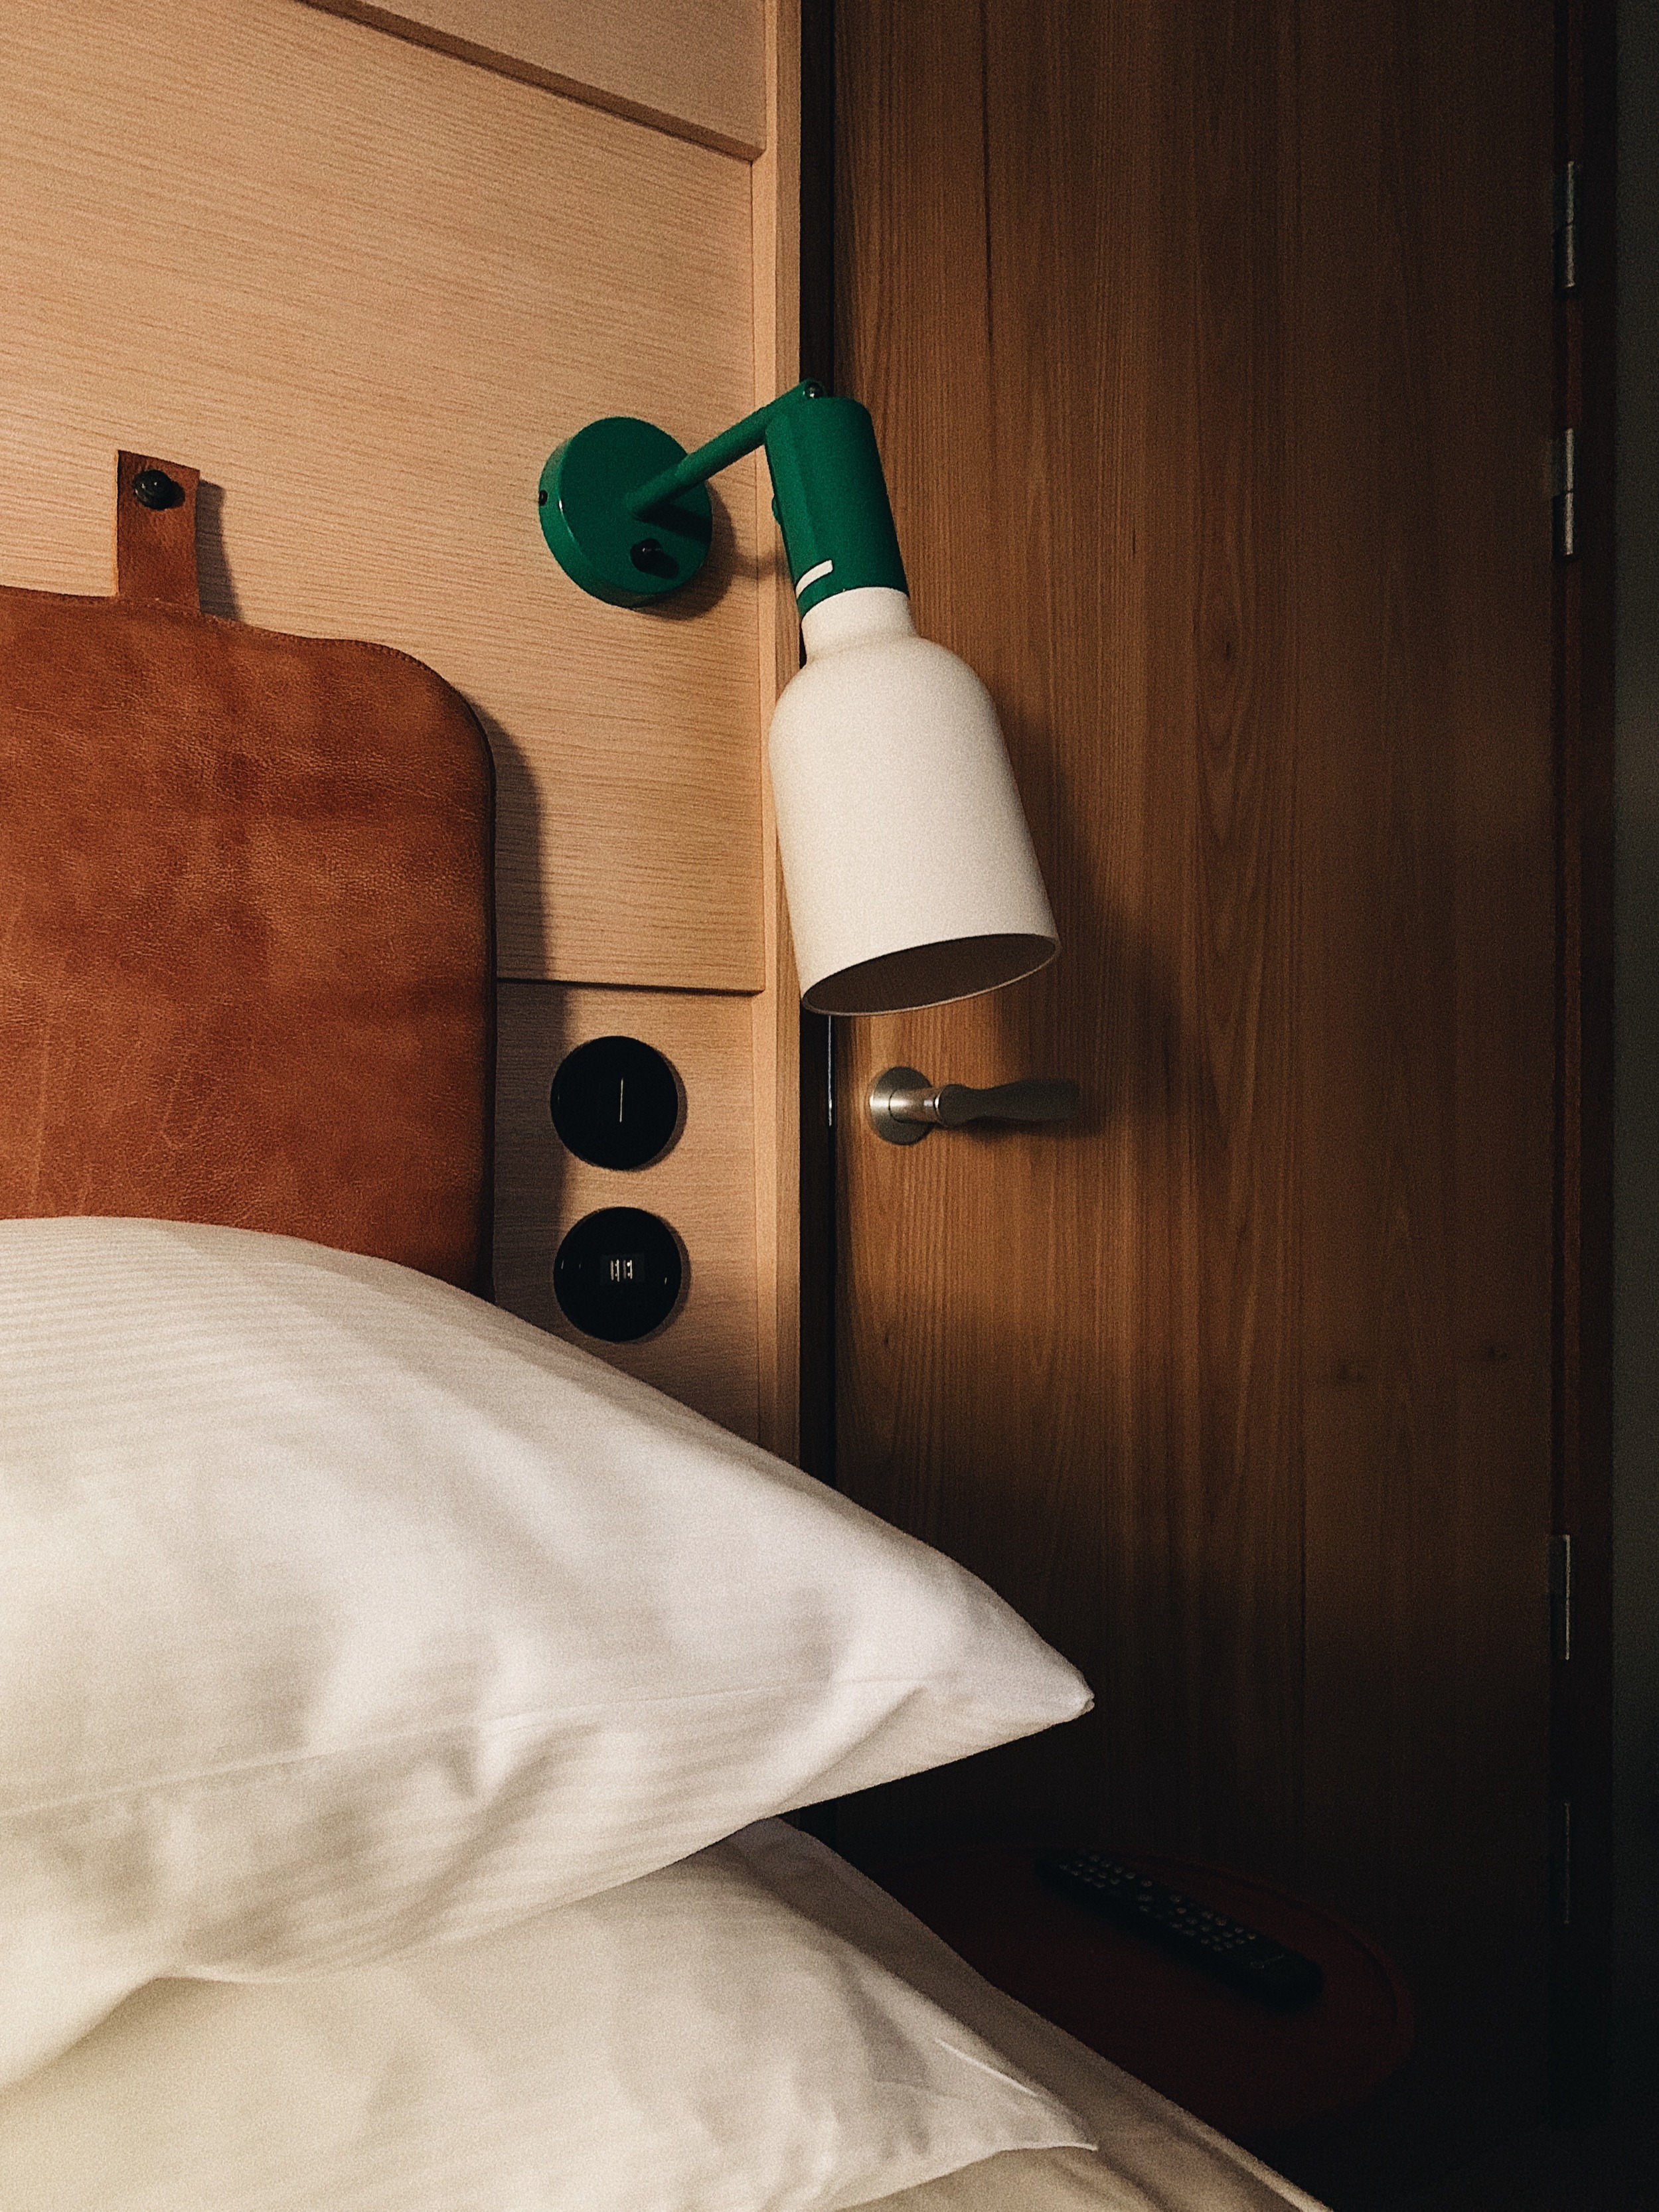 Pillow and lamp beside bed at hotel HOBO in Stockholm.